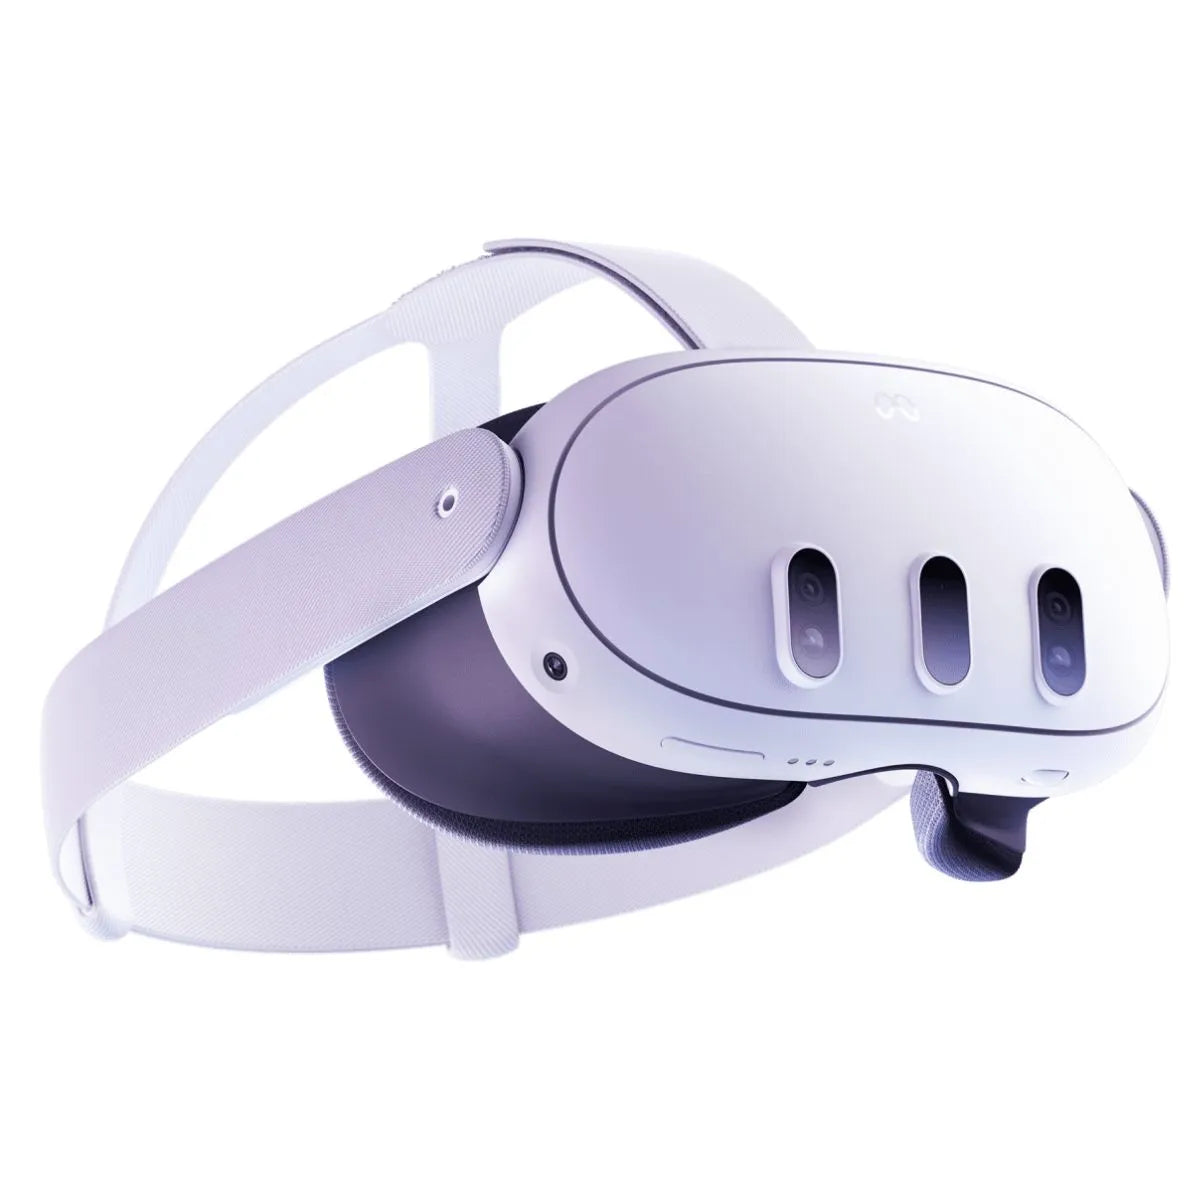 Meta Quest 3 review: The ultimate entry-level VR headset - Dexerto